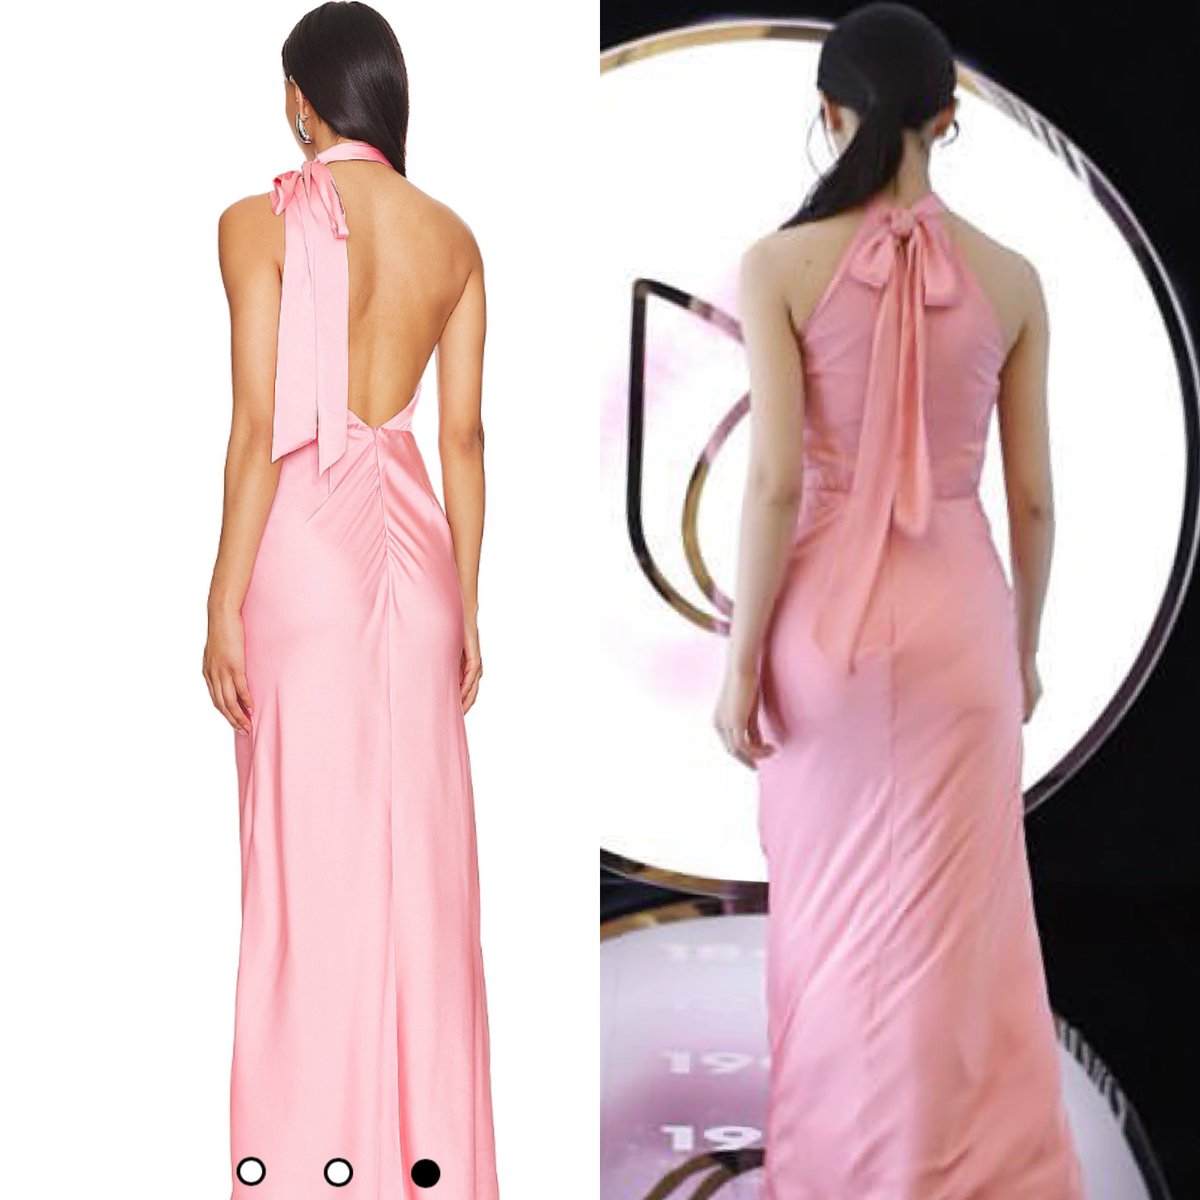 just saw in my timeline that tzuyu’s albie gown for pond’s indonesia event was supposed to be backless but out of respect for the host country, they changed it 🥹